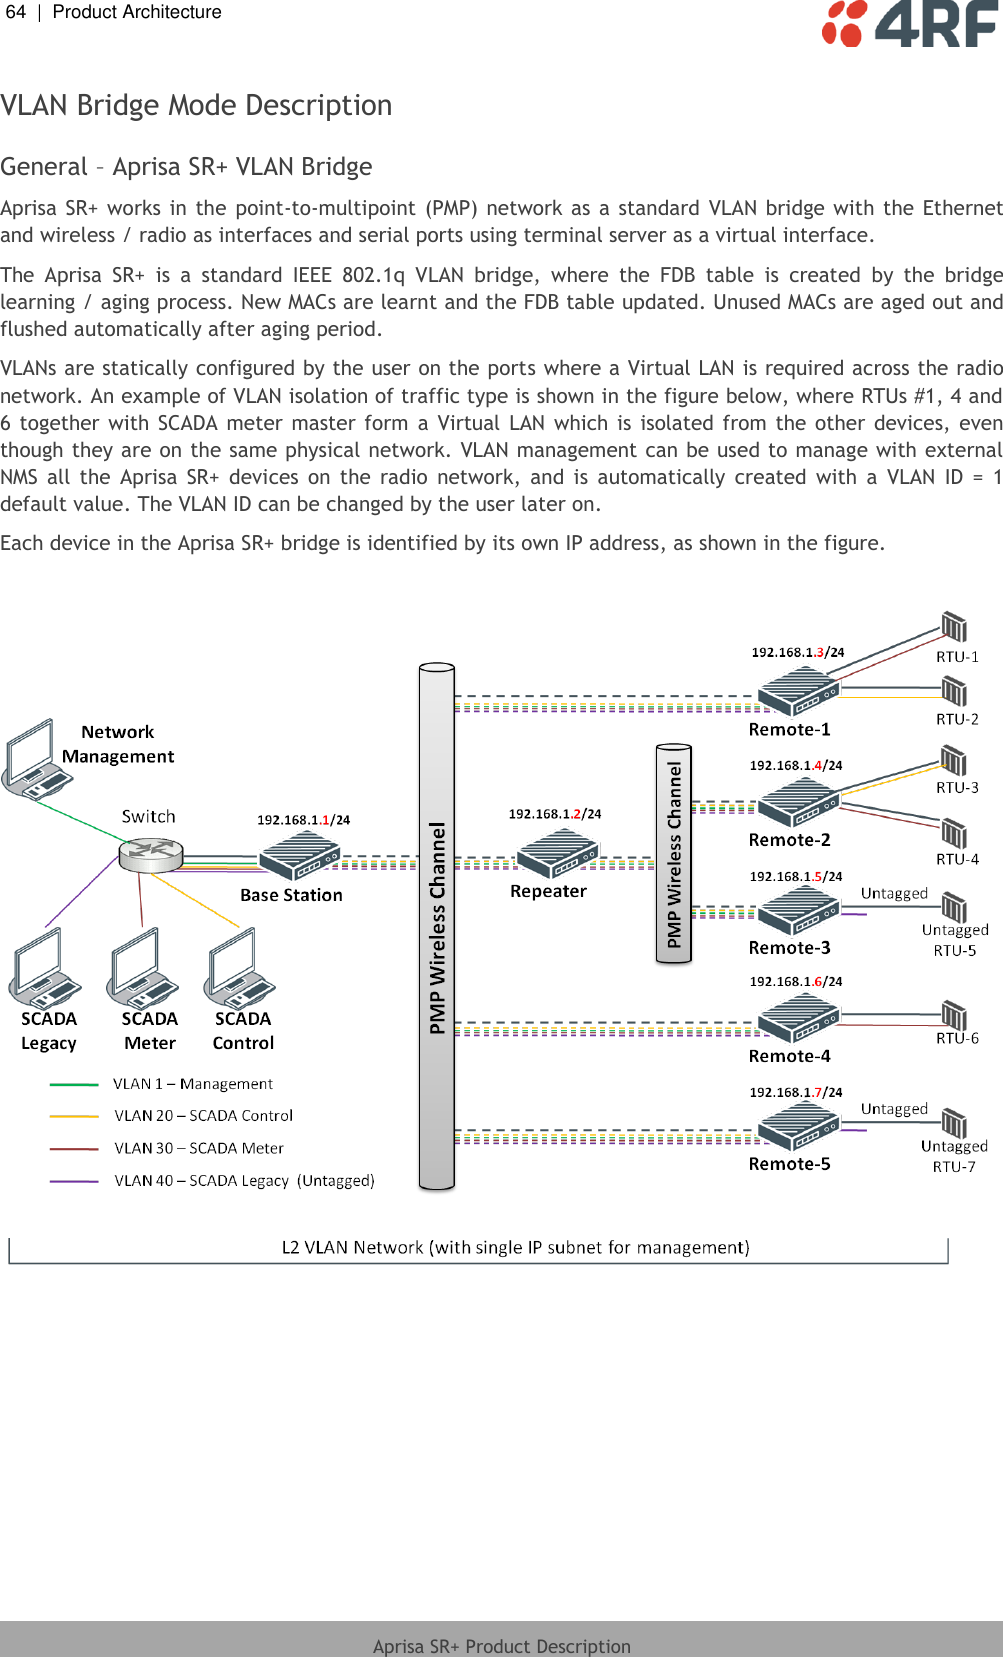 64  |  Product Architecture   Aprisa SR+ Product Description  VLAN Bridge Mode Description  General – Aprisa SR+ VLAN Bridge Aprisa SR+ works  in the  point-to-multipoint  (PMP)  network as a standard  VLAN bridge with the Ethernet and wireless / radio as interfaces and serial ports using terminal server as a virtual interface. The  Aprisa  SR+  is  a  standard  IEEE  802.1q  VLAN  bridge,  where  the  FDB  table  is  created  by  the  bridge learning / aging process. New MACs are learnt and the FDB table updated. Unused MACs are aged out and flushed automatically after aging period. VLANs are statically configured by the user on the ports where a Virtual LAN is required across the radio network. An example of VLAN isolation of traffic type is shown in the figure below, where RTUs #1, 4 and 6  together  with SCADA  meter master  form  a Virtual  LAN  which  is  isolated from the  other devices,  even though they are on the same physical network. VLAN management can be used to manage with external NMS  all  the  Aprisa  SR+  devices  on  the  radio  network,  and  is  automatically  created  with  a  VLAN  ID  =  1 default value. The VLAN ID can be changed by the user later on. Each device in the Aprisa SR+ bridge is identified by its own IP address, as shown in the figure.    